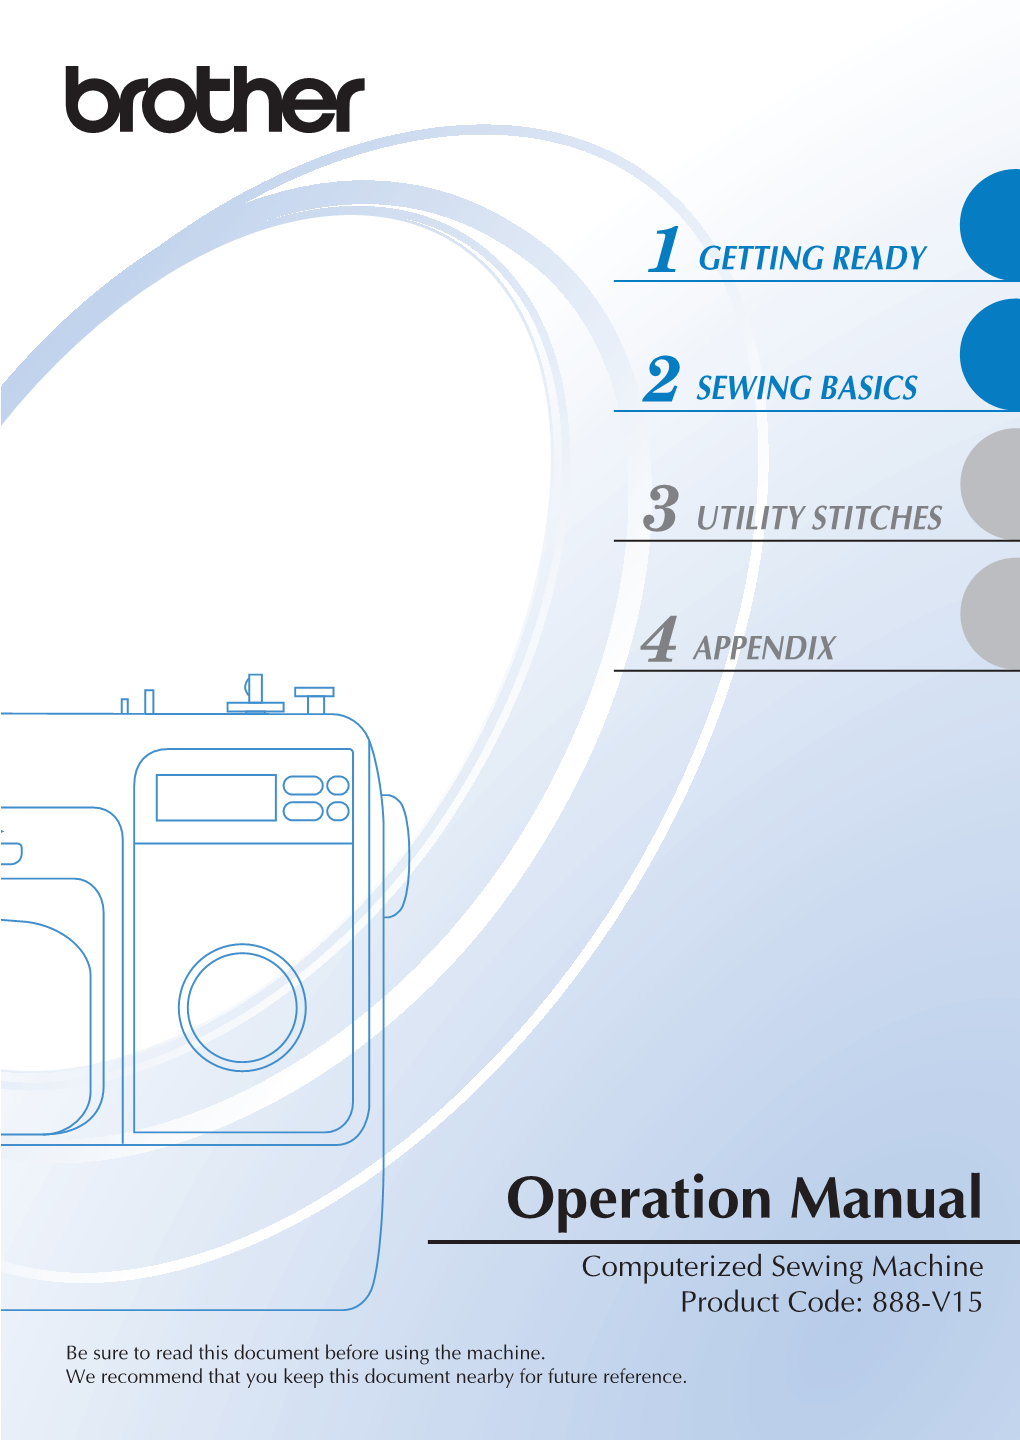 Operation Manual Computerized Sewing Machine Product Code: 888-V15